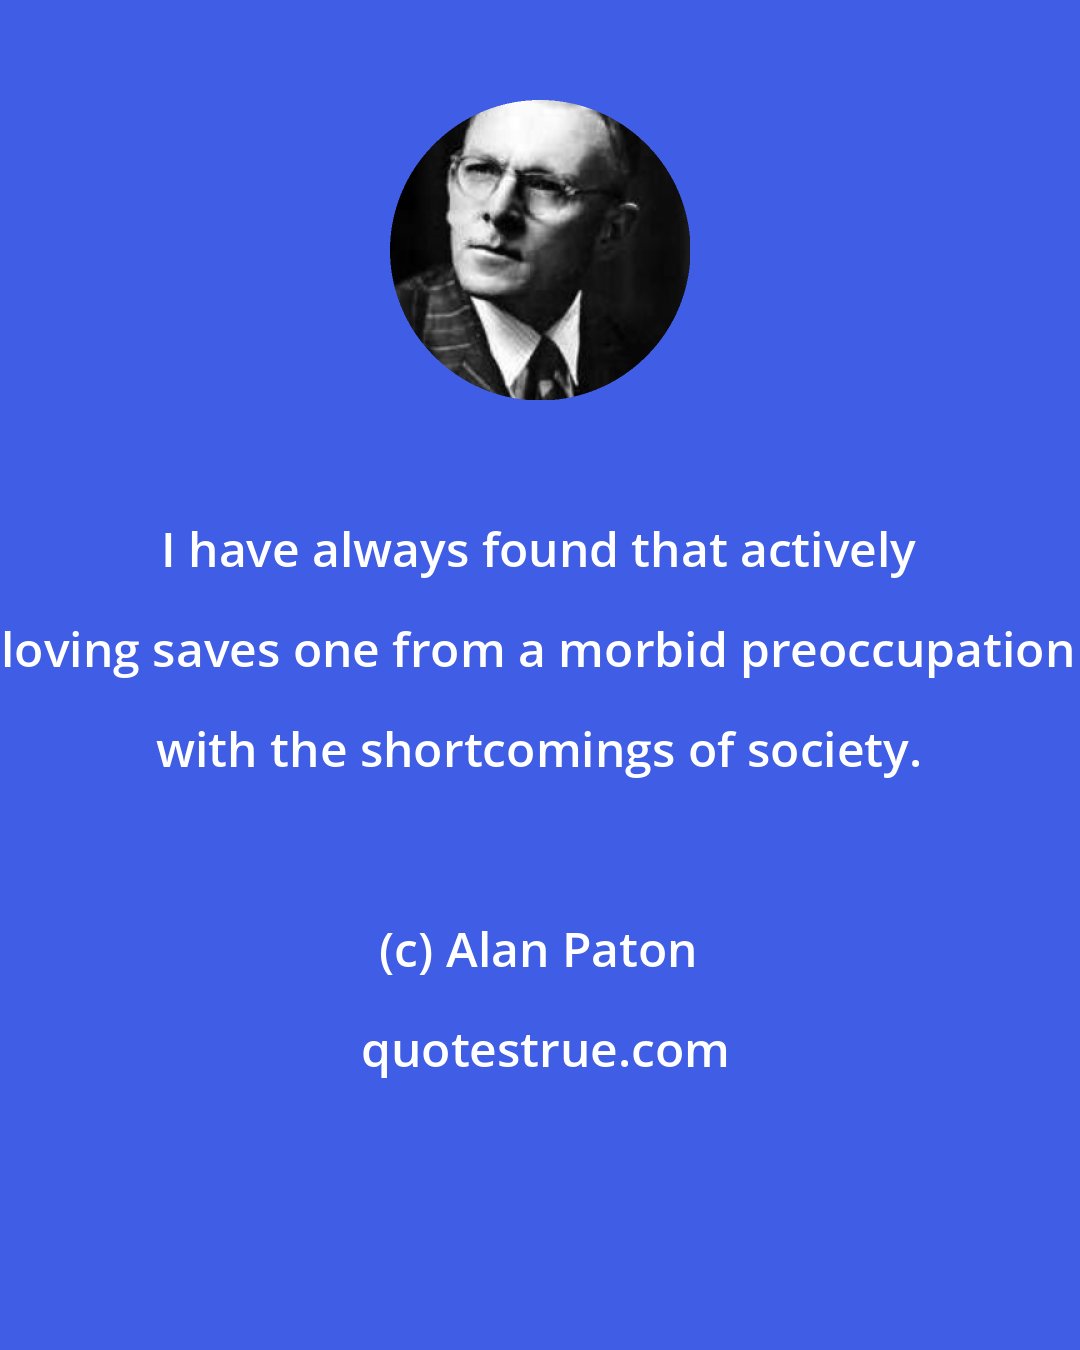 Alan Paton: I have always found that actively loving saves one from a morbid preoccupation with the shortcomings of society.